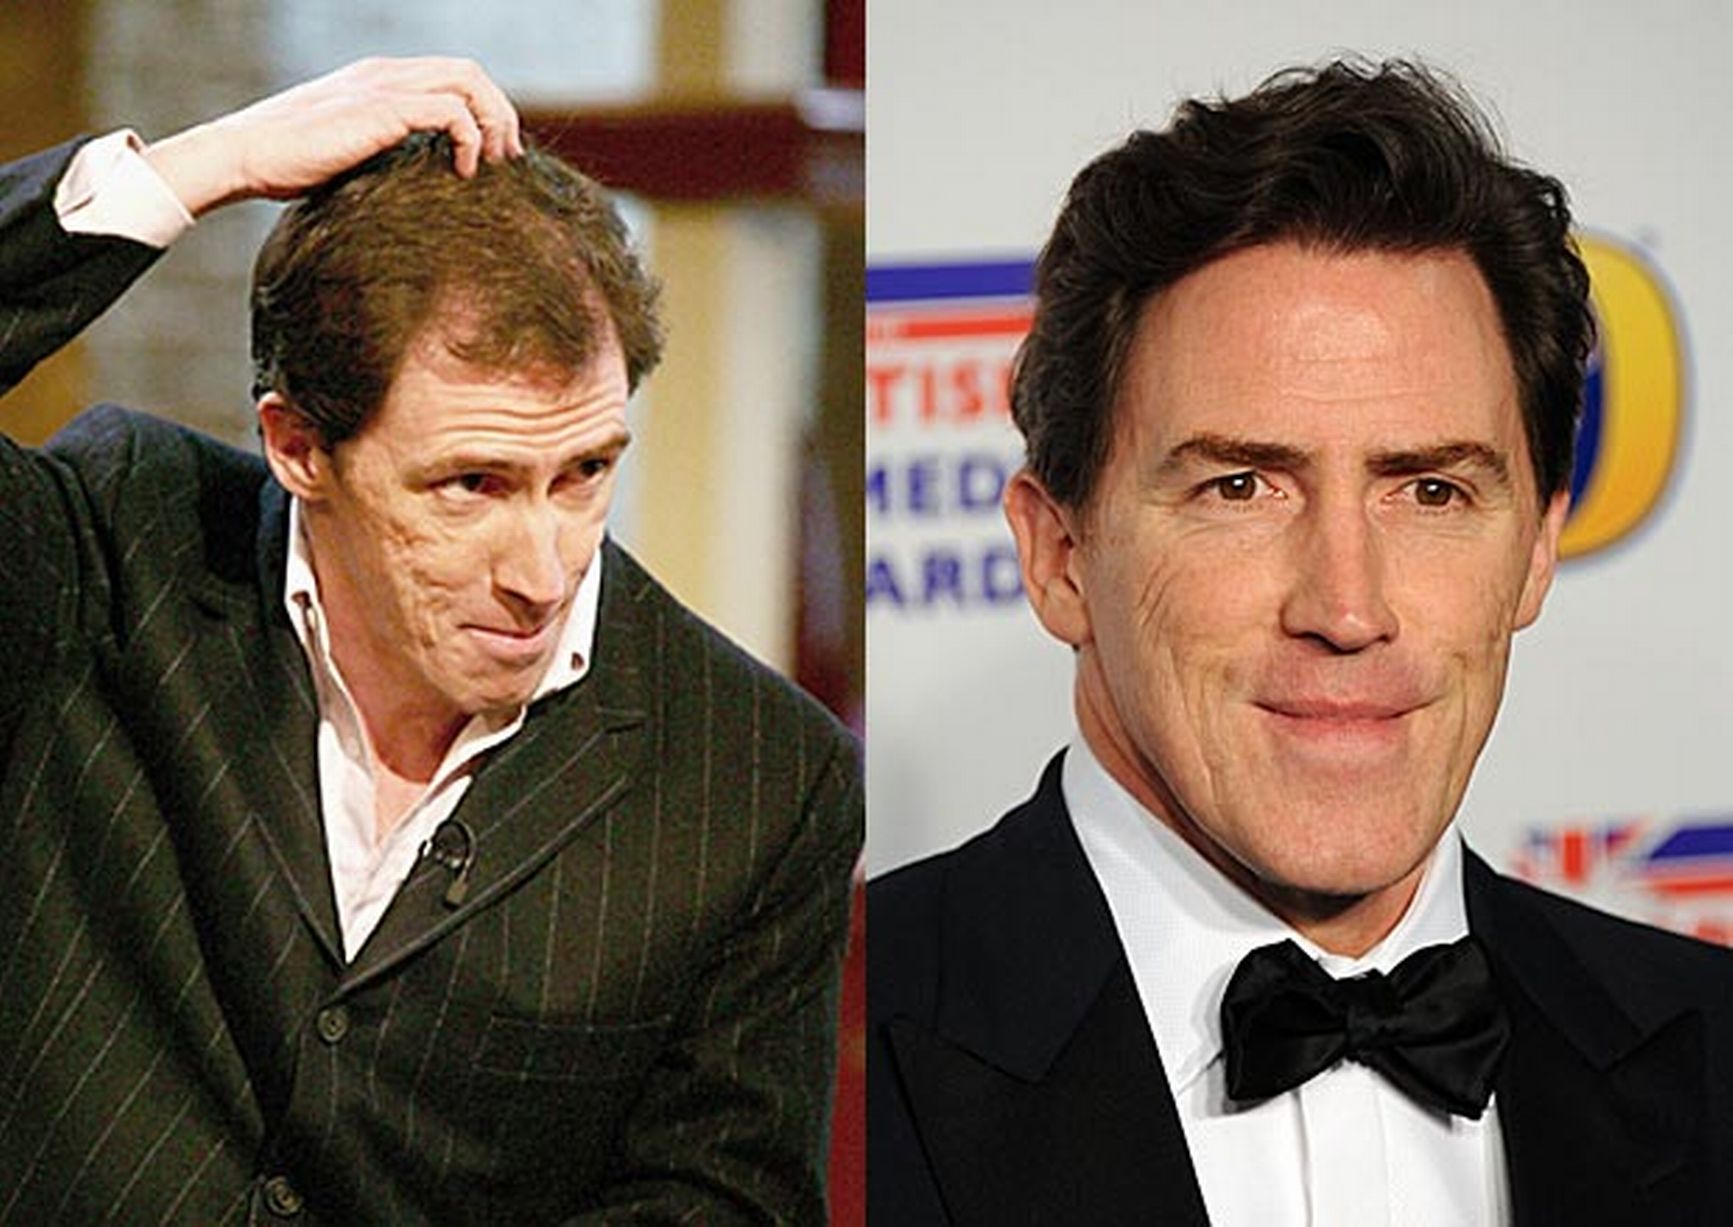 Rob Brydon before and after rumoured hair transplant